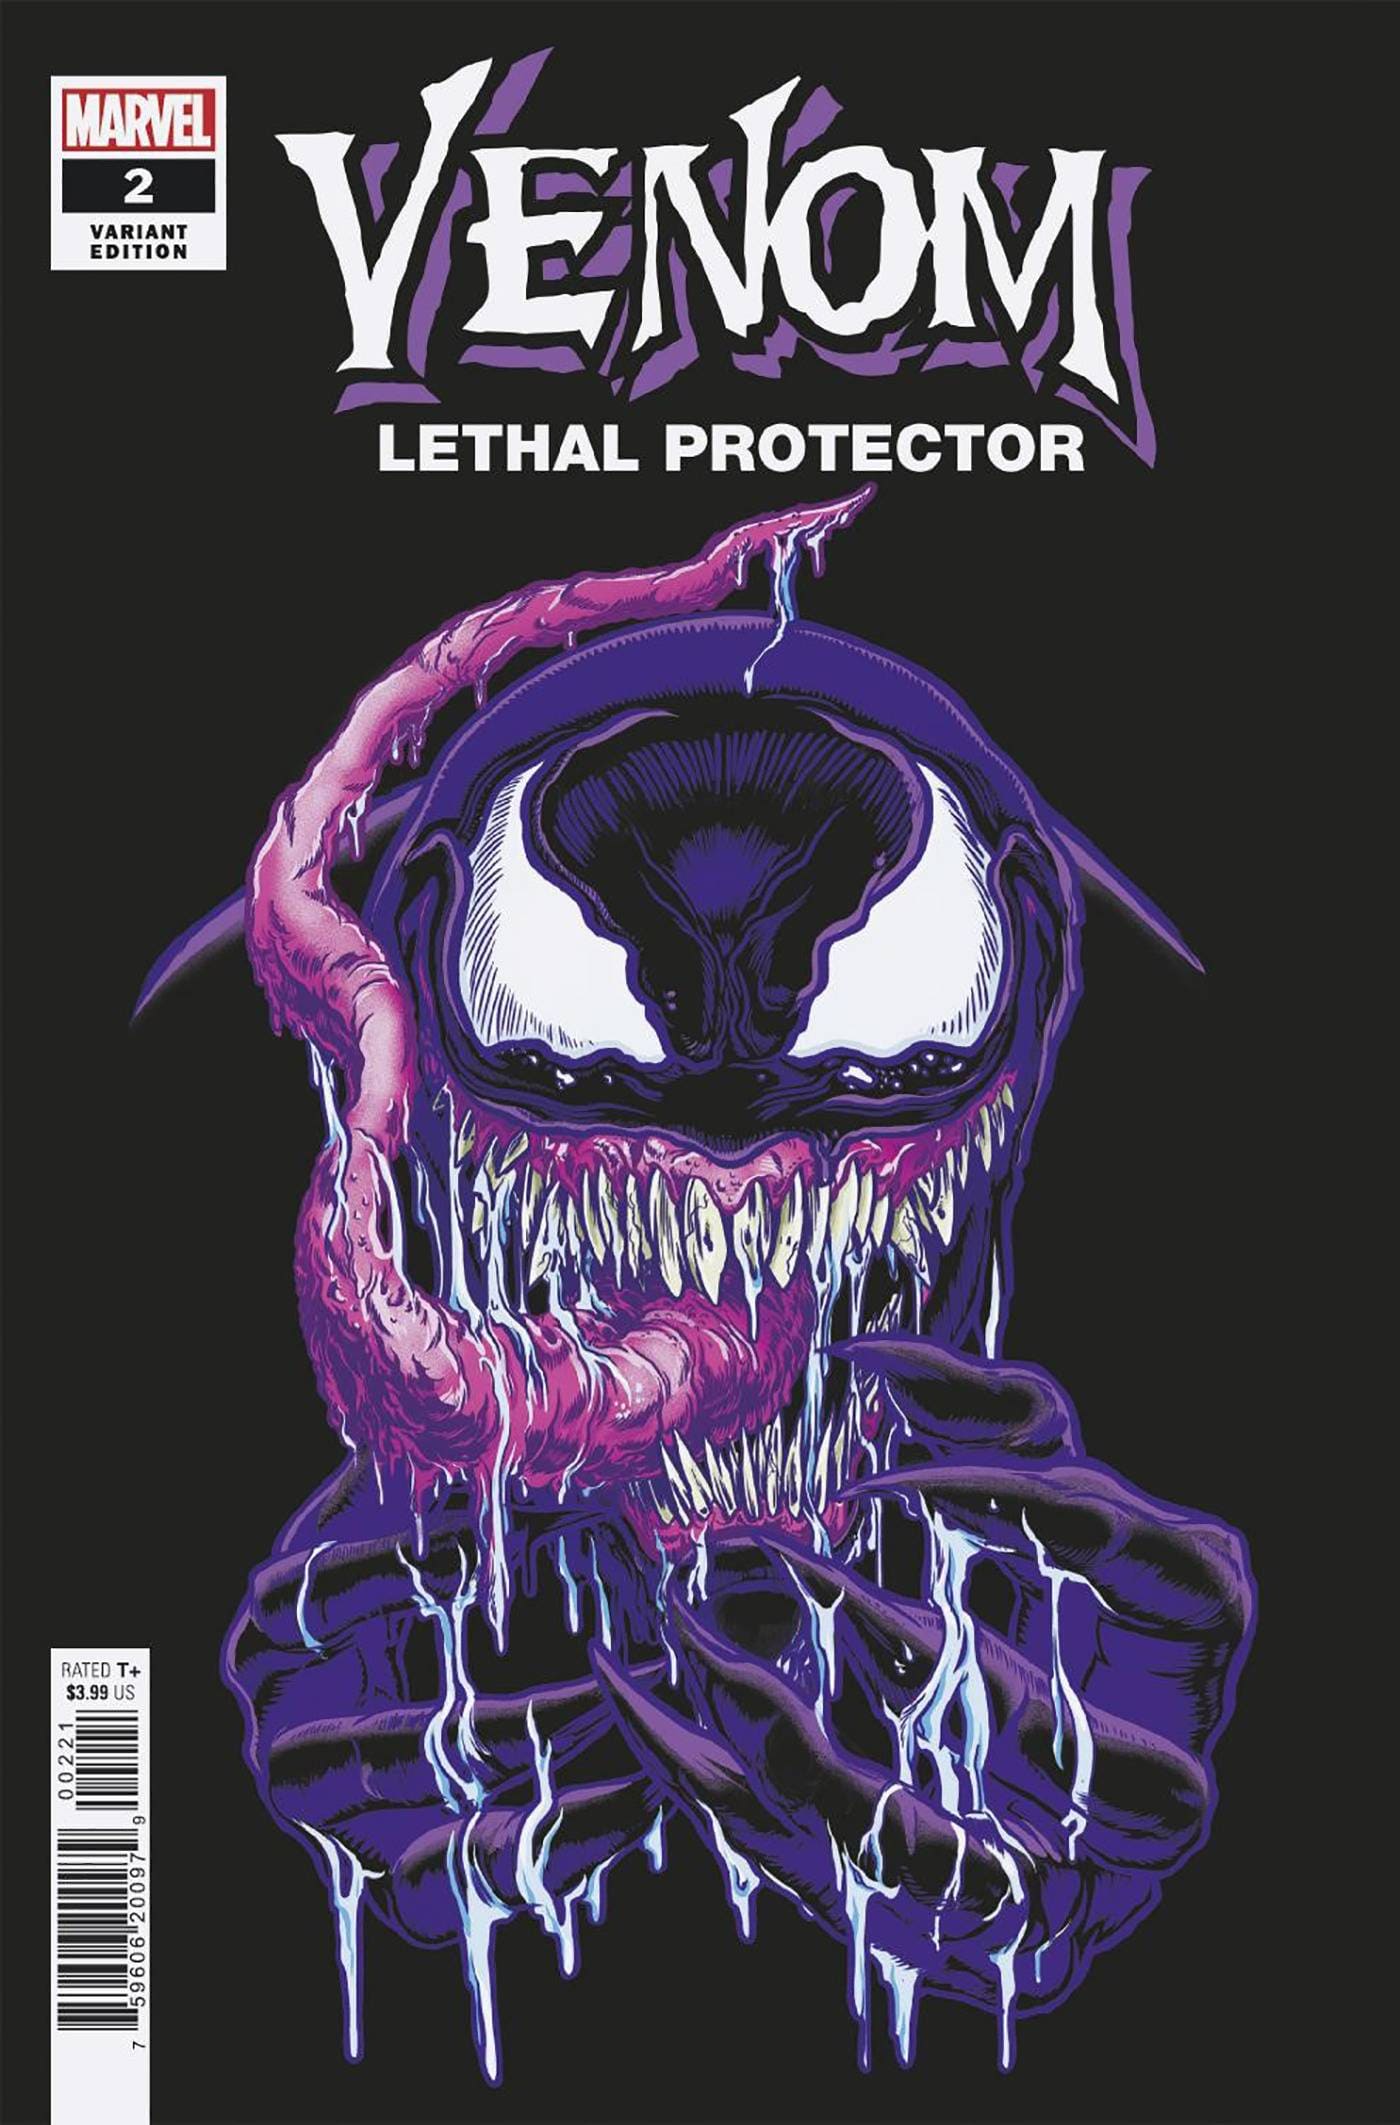 VENOM LETHAL PROTECTOR #2 (OF 5) SCARECROWOVEN COVER